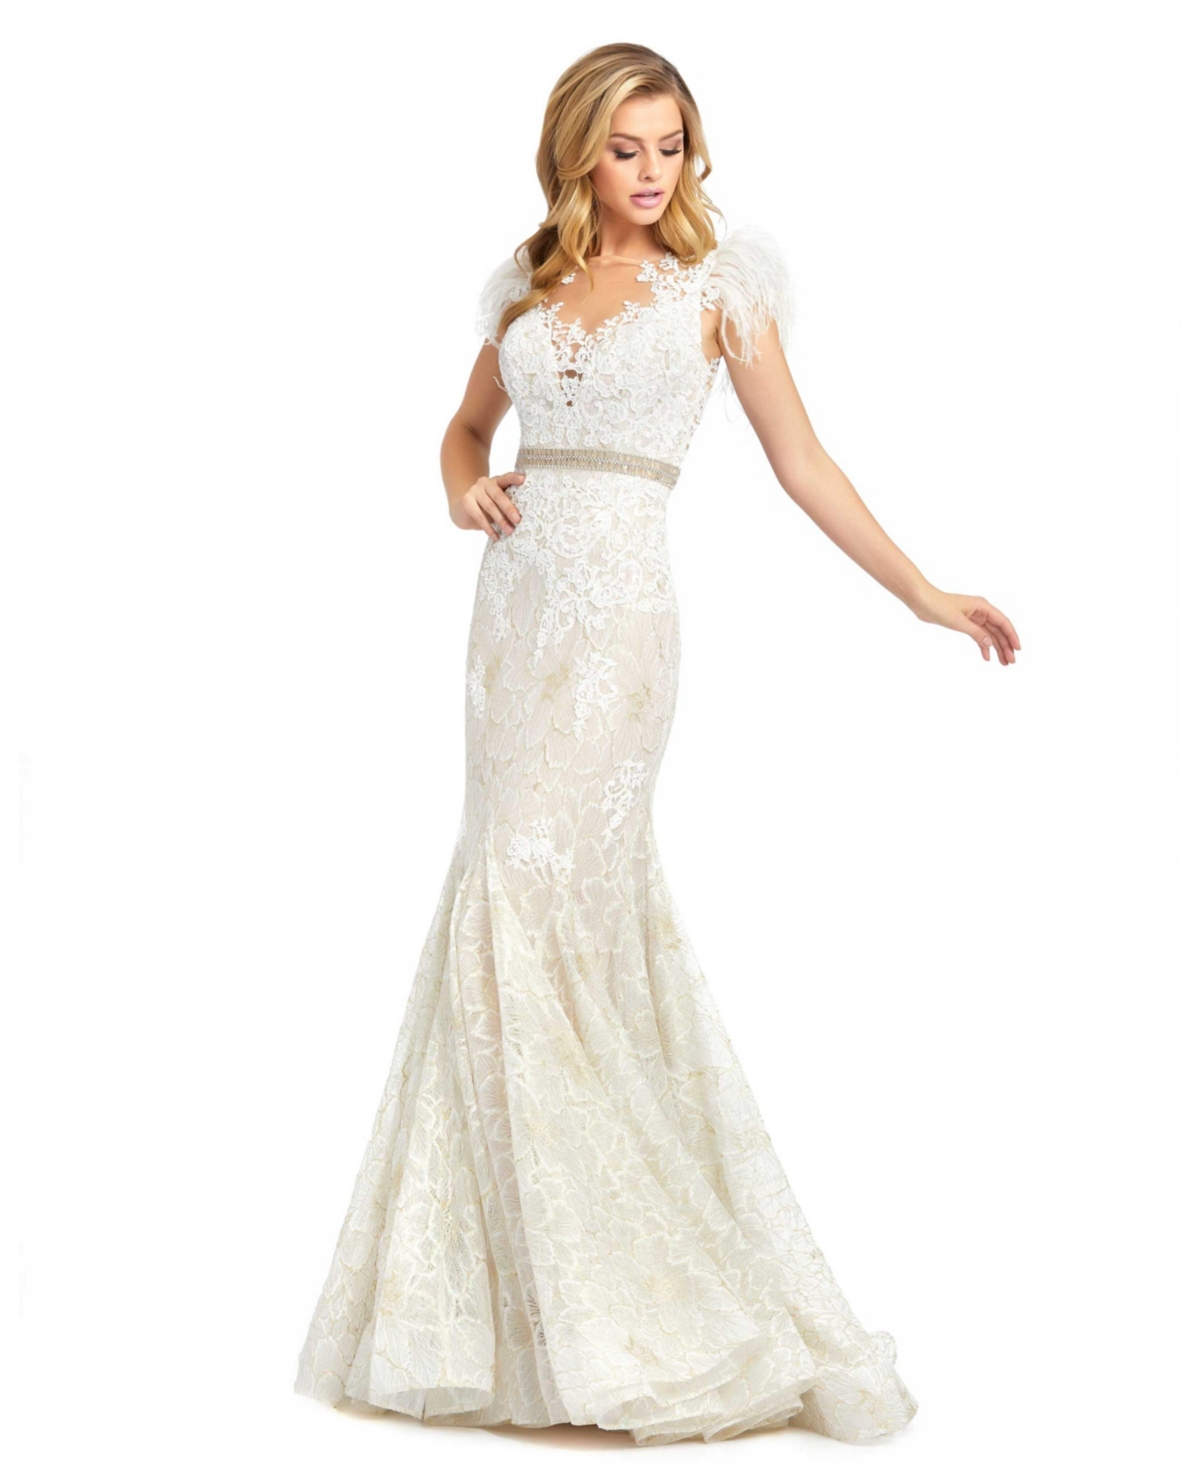 Women's Embellished Feather Cap Sleeve Illusion Neck Trumpet Gown - Ivory nude